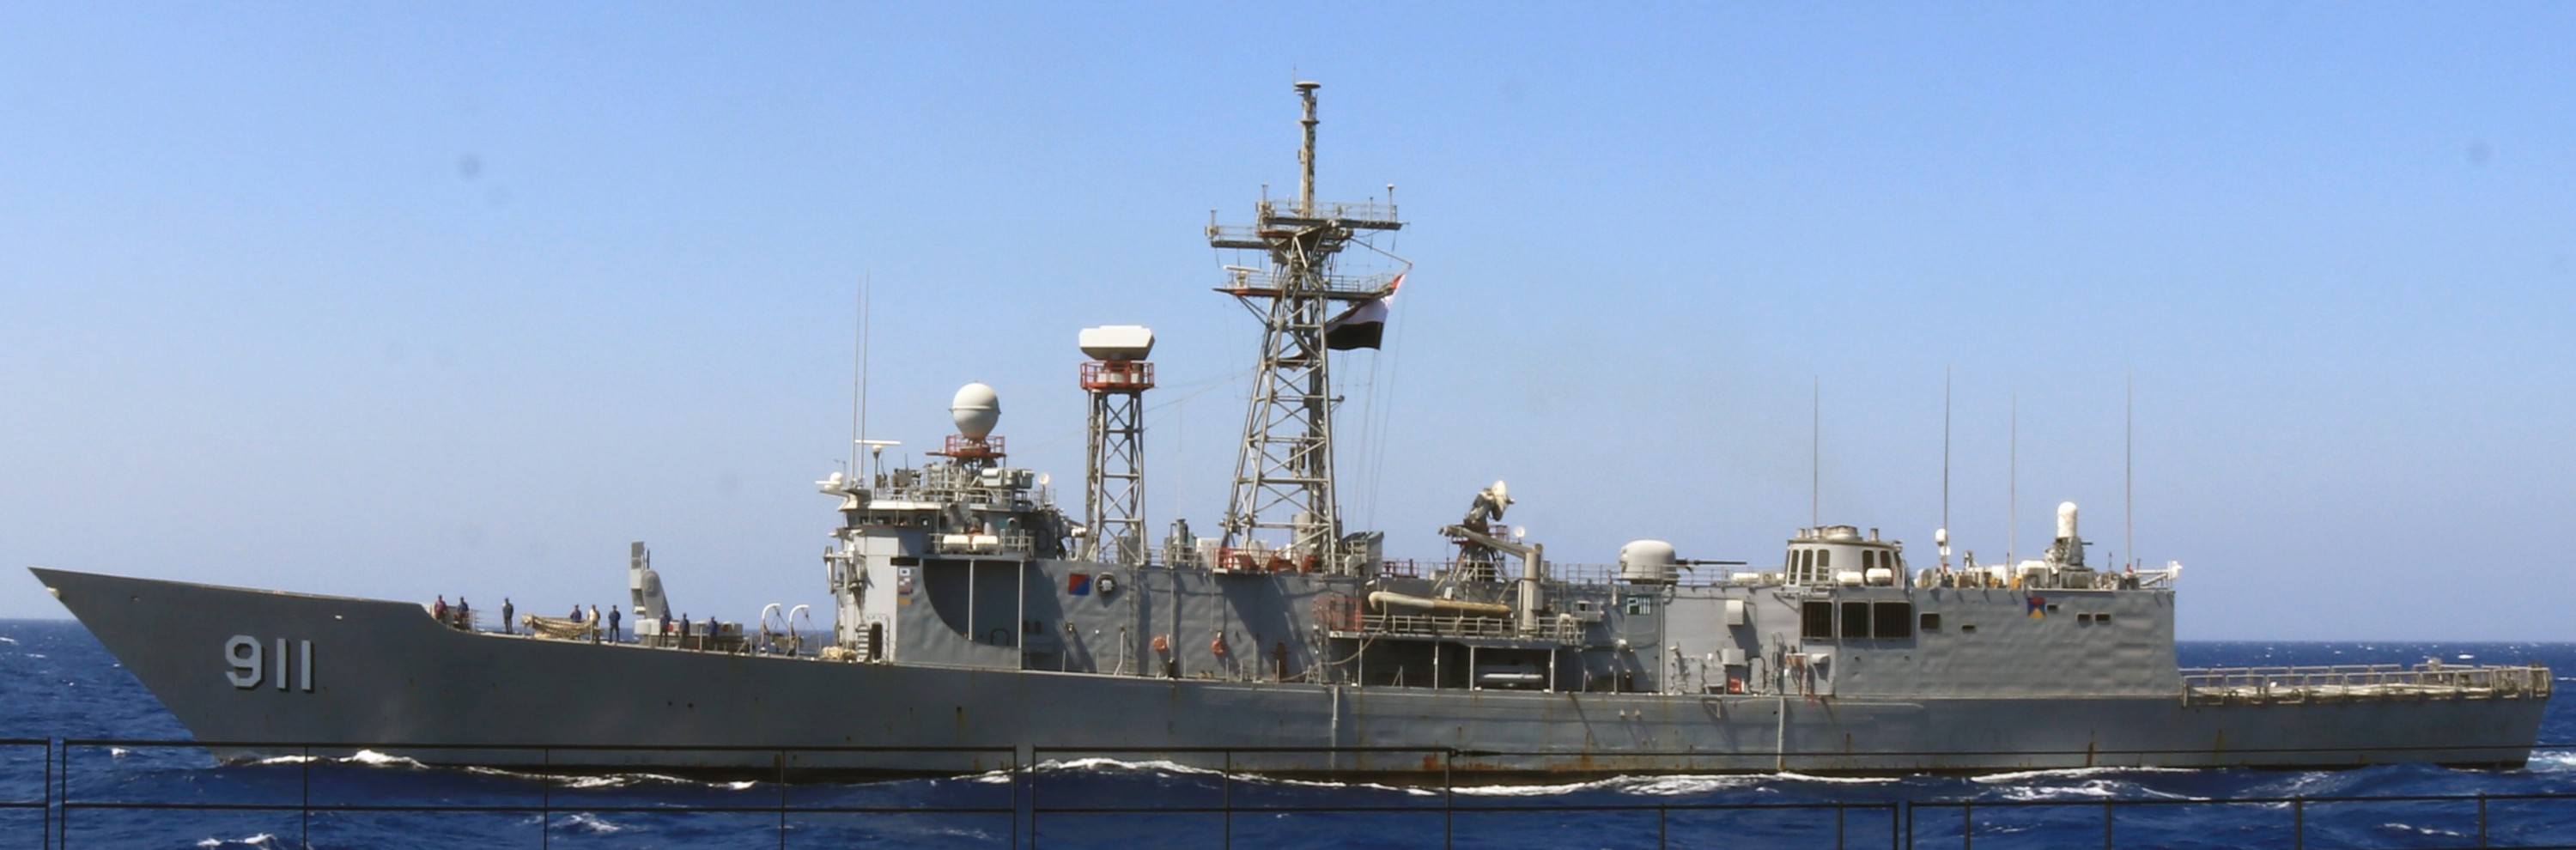 f-911 ens alexandria perry class frigate egyptian naval force navy 06